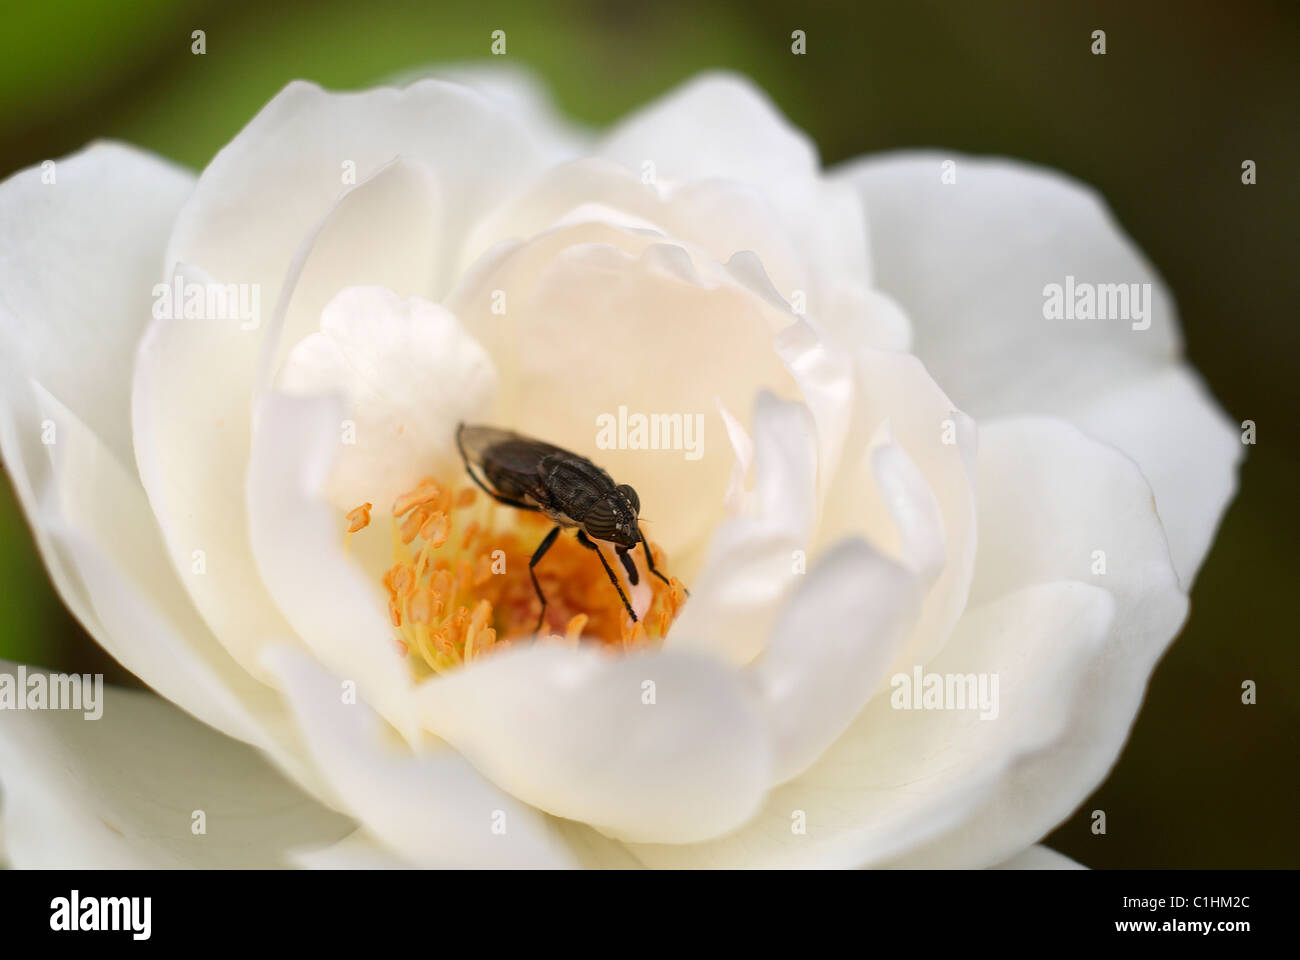 White climbing rose, yellow pollen, white rose, climbing rose, close-up, macro, love, friendship, rose, peace, insect, fly Stock Photo